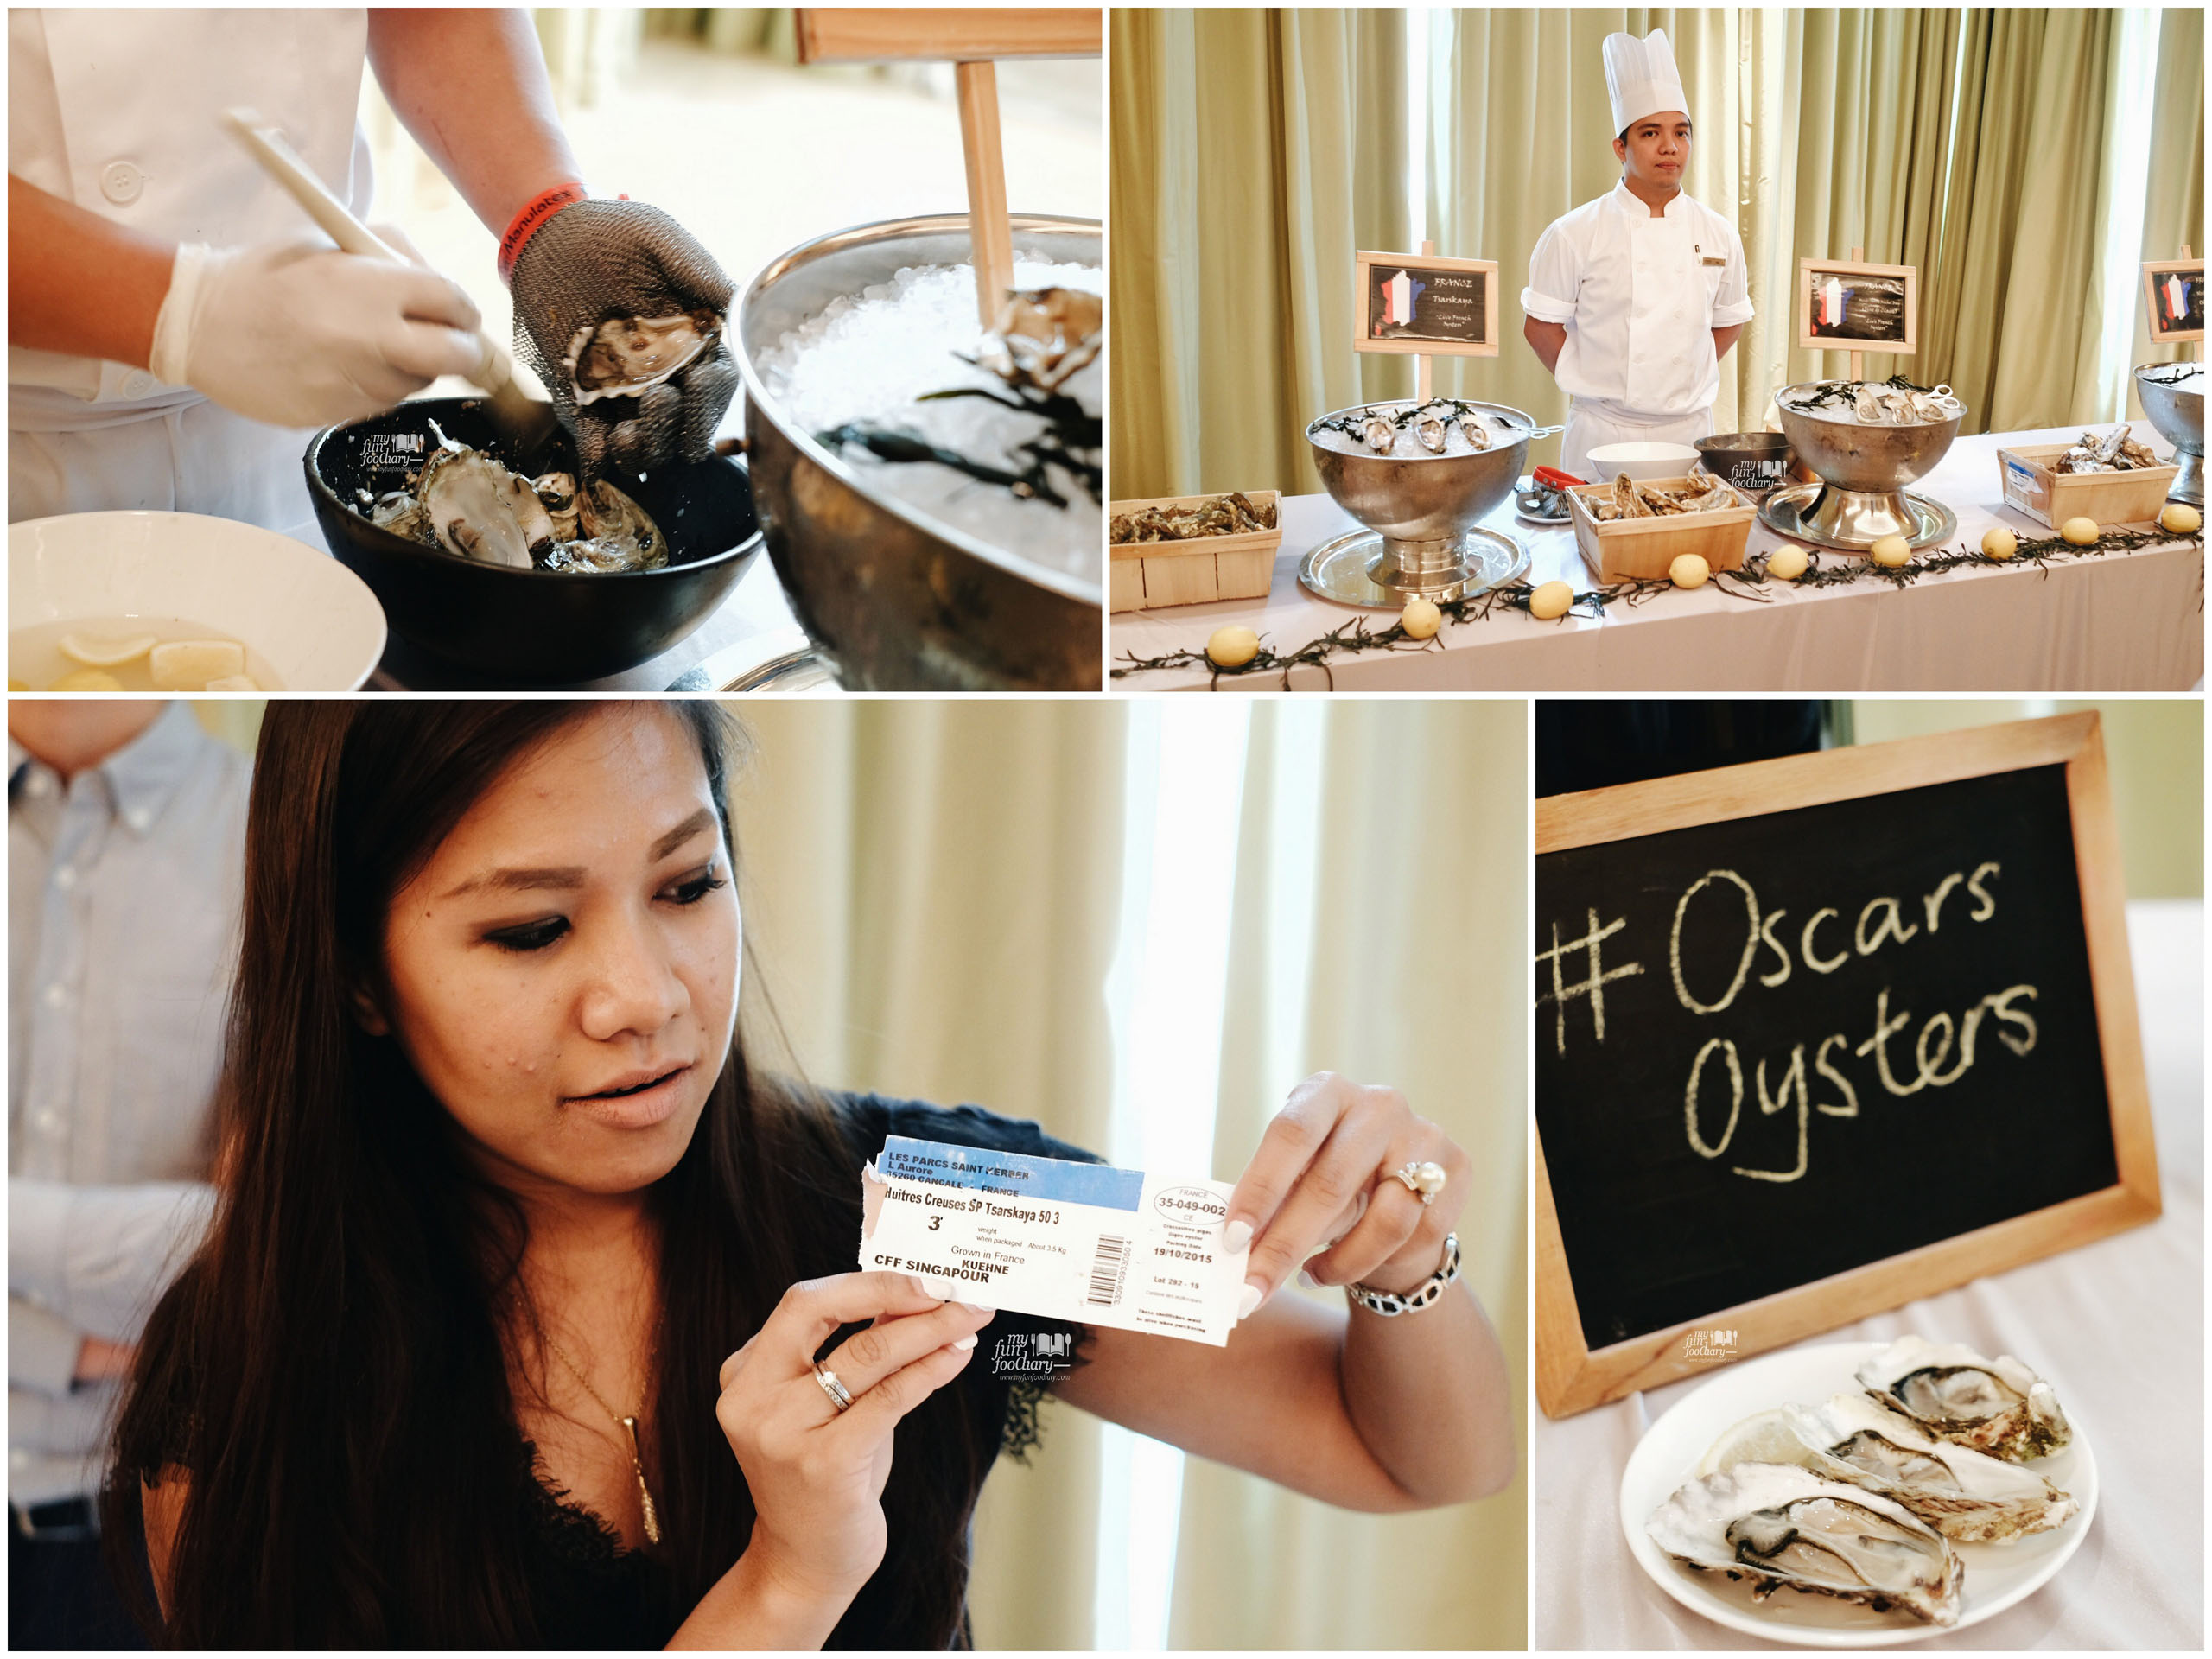 Knowledge about France Oysters at Conrad Singapore by Myfunfoodiary